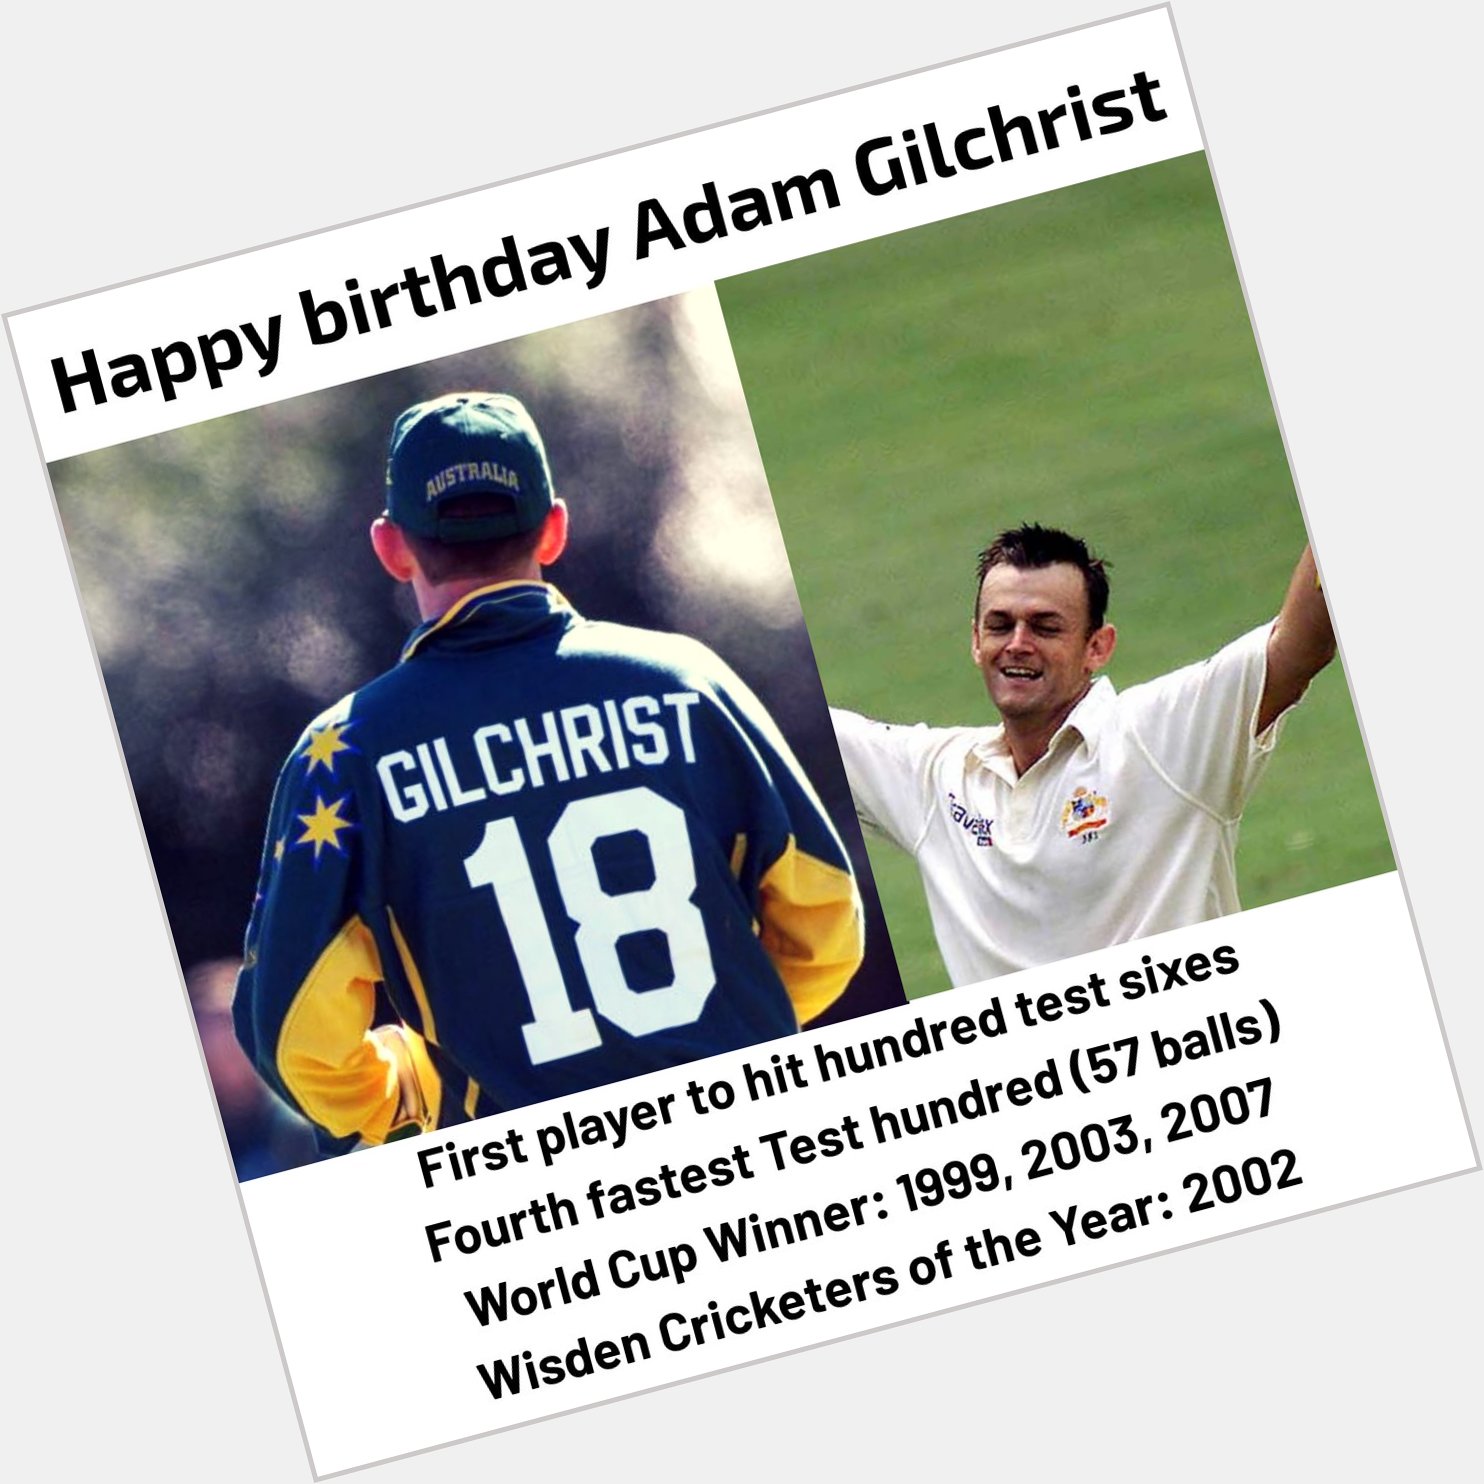 A very happy birthday to Adam Gilchrist  